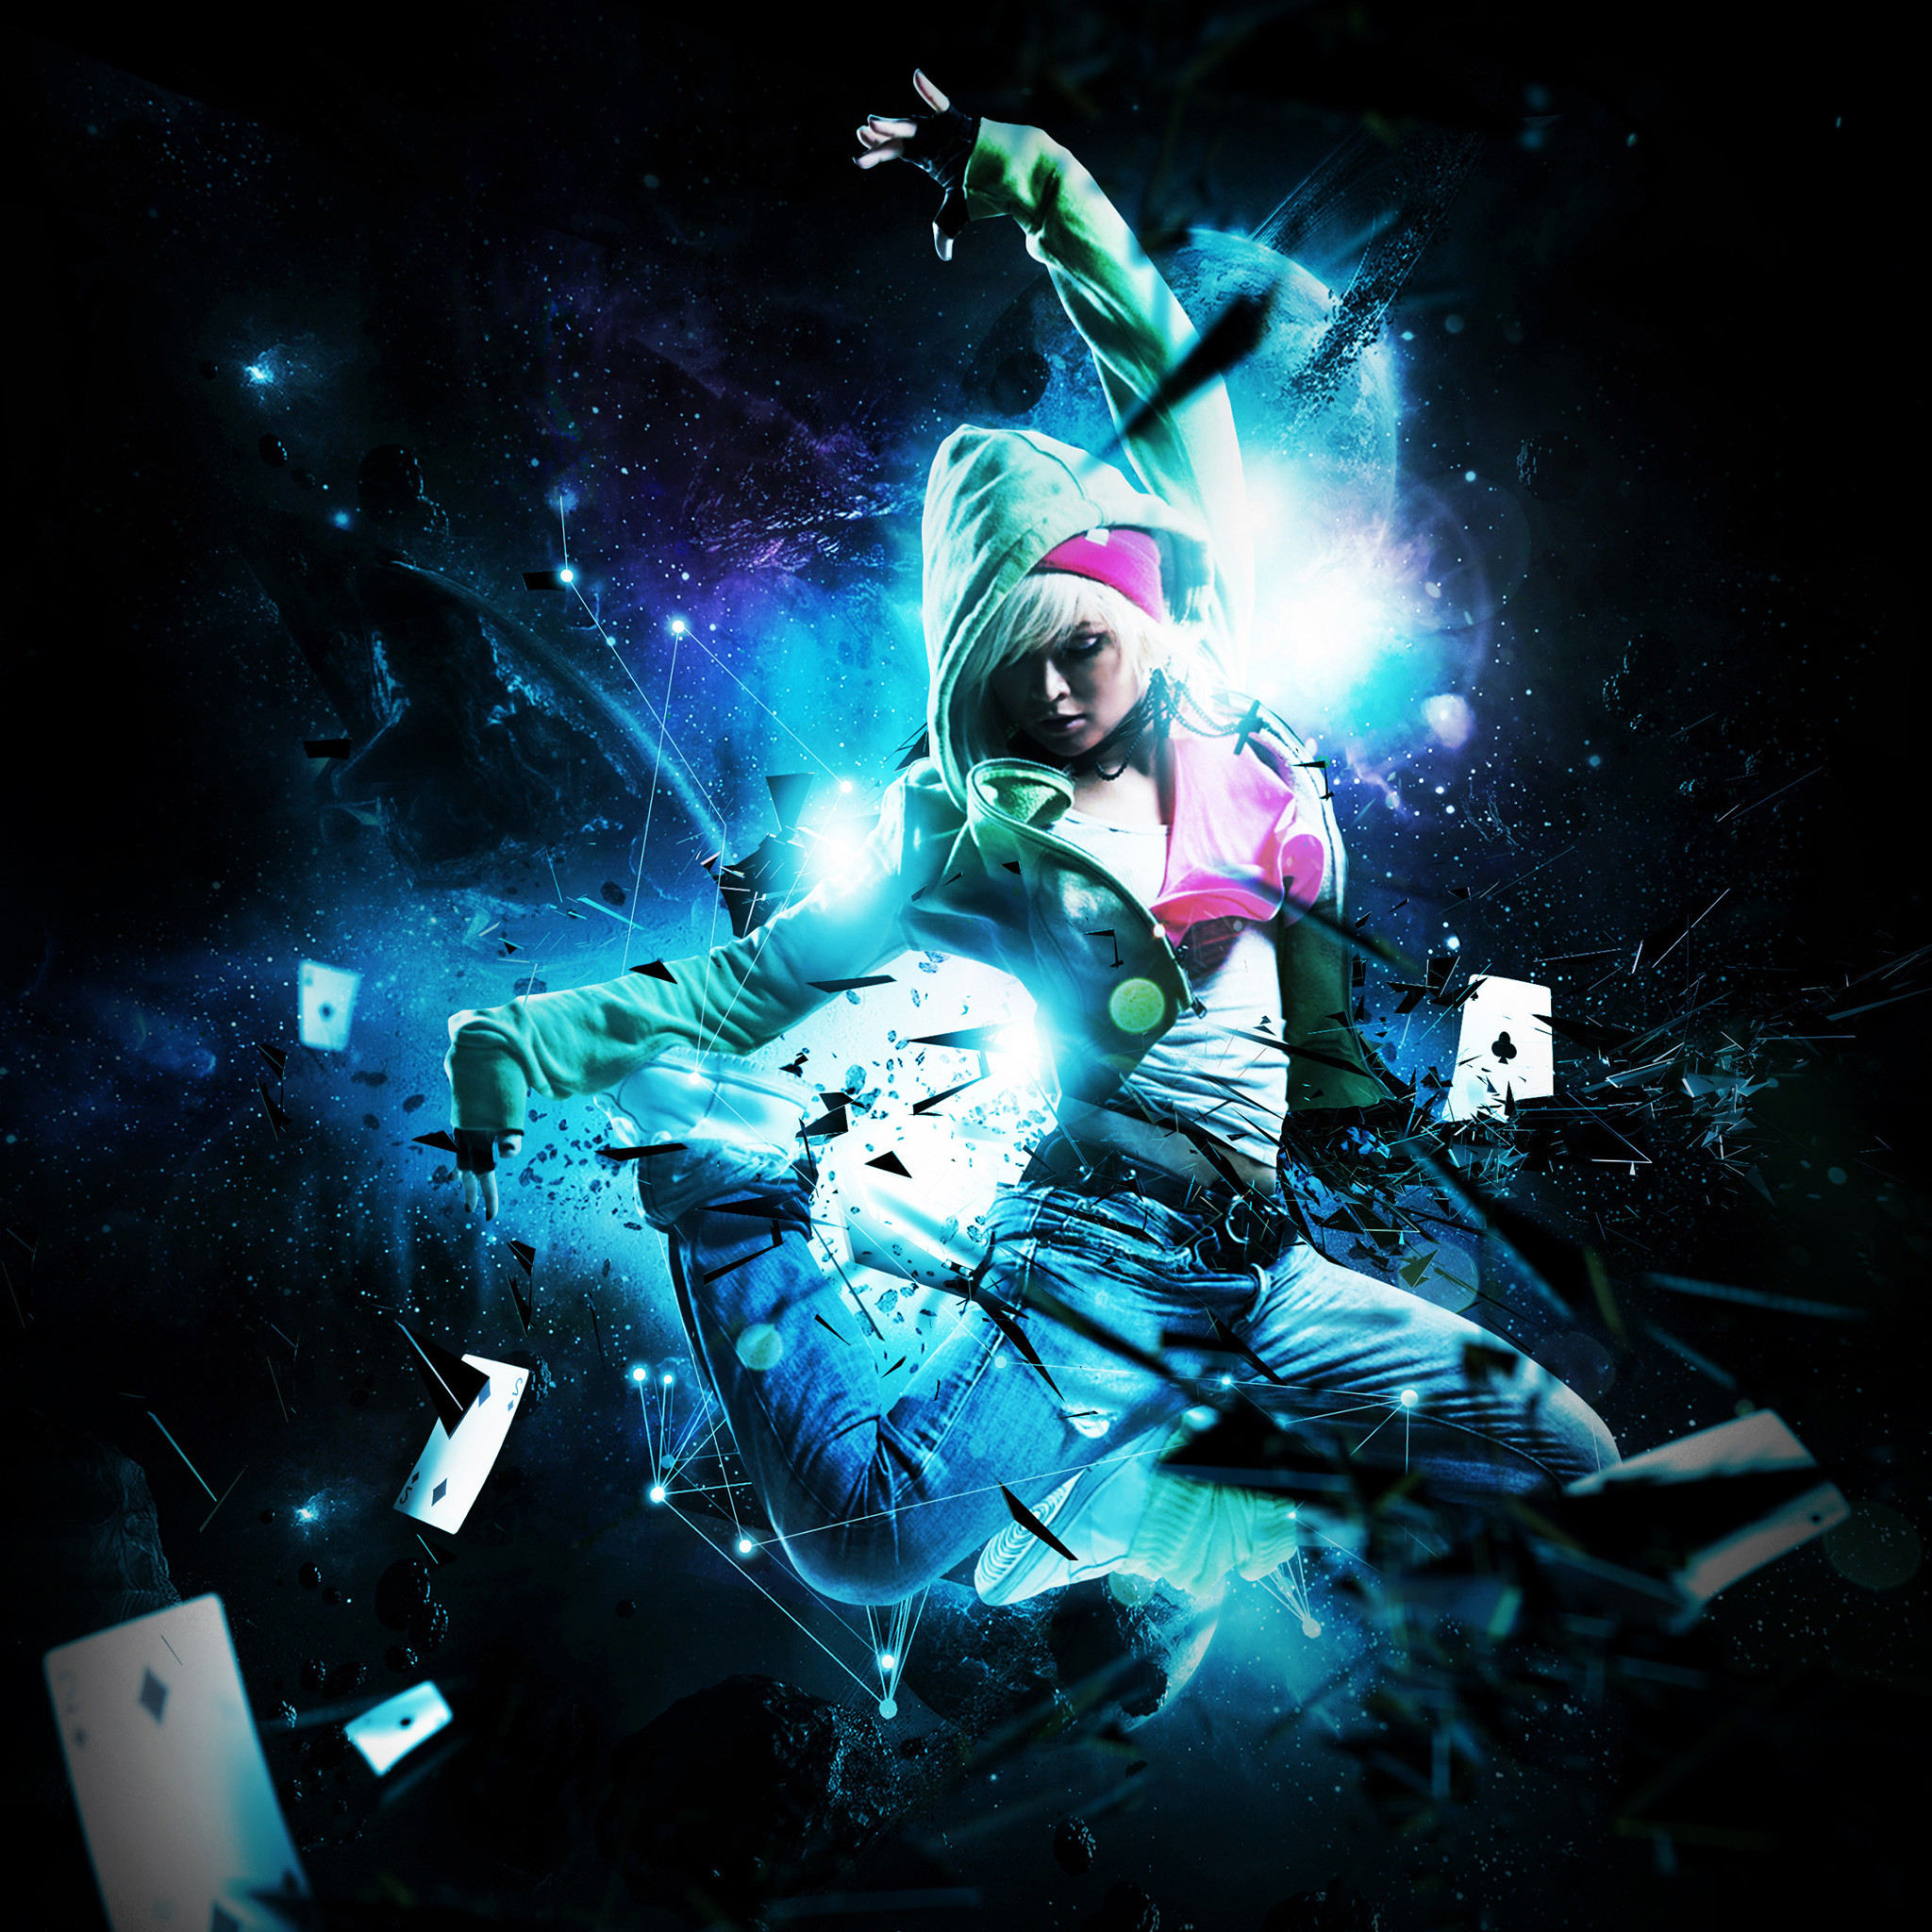 1440x900 Hip Hop Dancer Wallpaper Music And Dance Wallpapers Occ Foreclosure Ipad タブレット壁紙ギャラリー